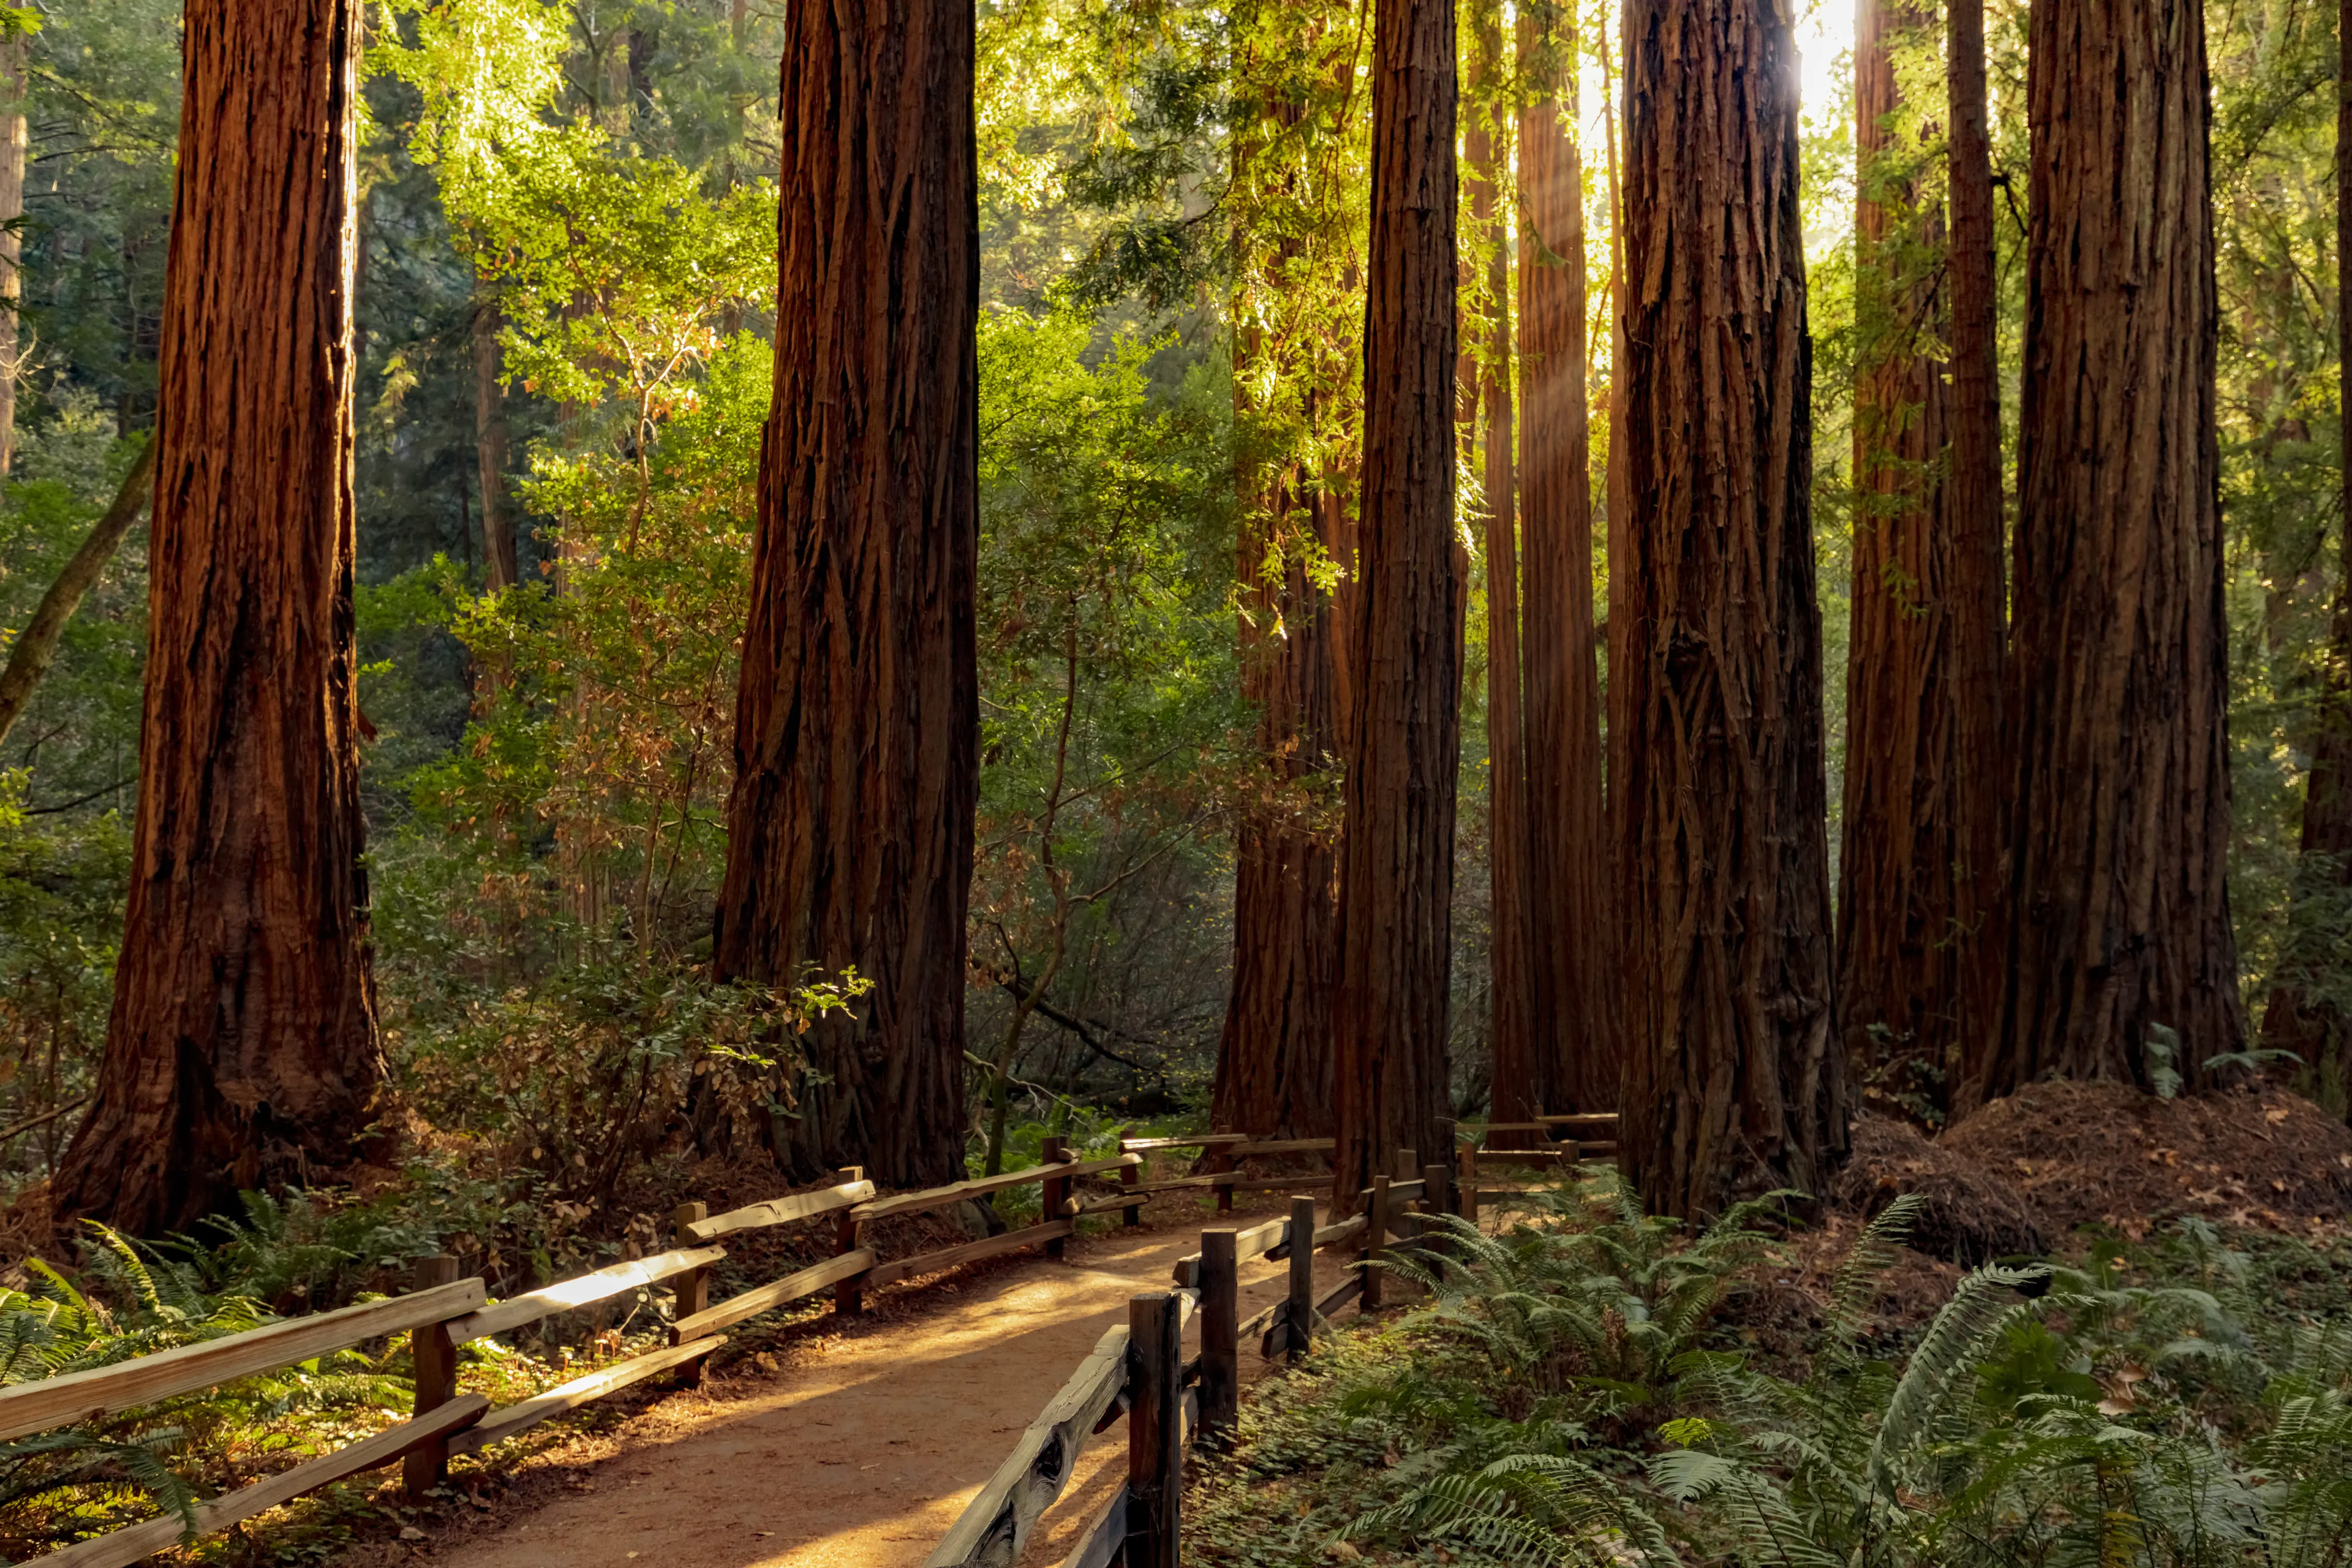 Trail through redwoods in Muir Woods National Monument